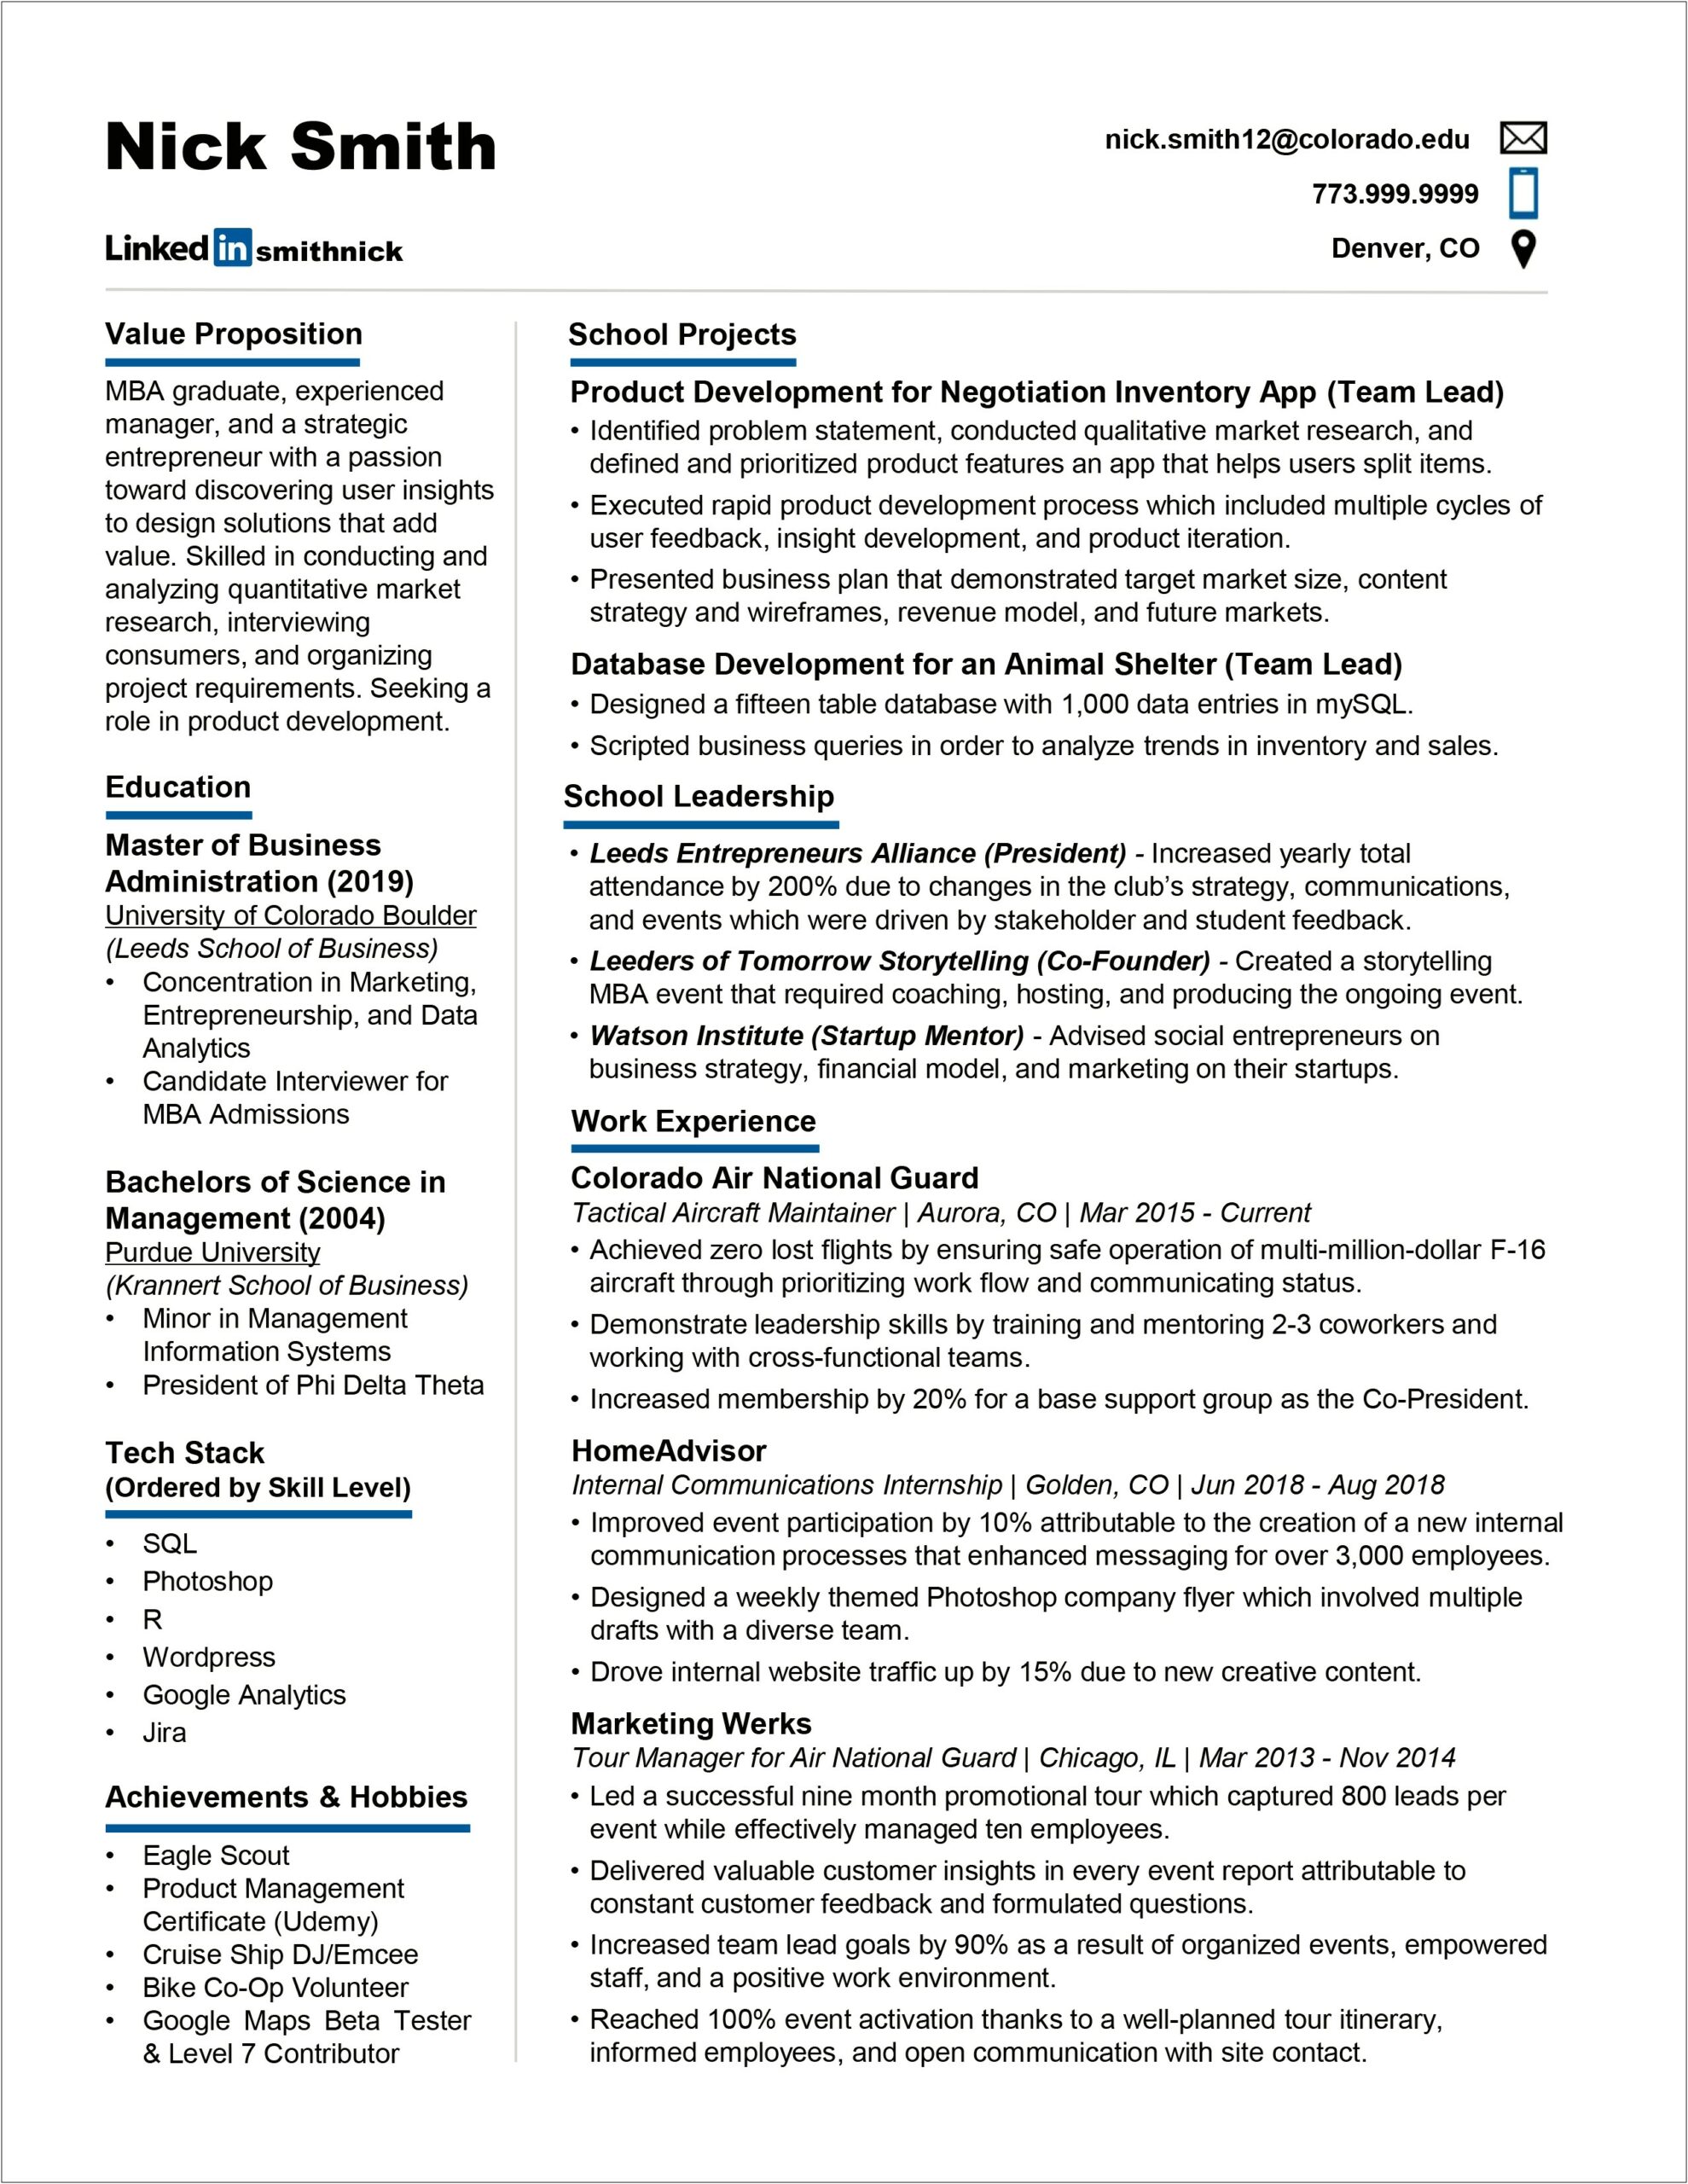 Sample Resume For Scouting Involvement